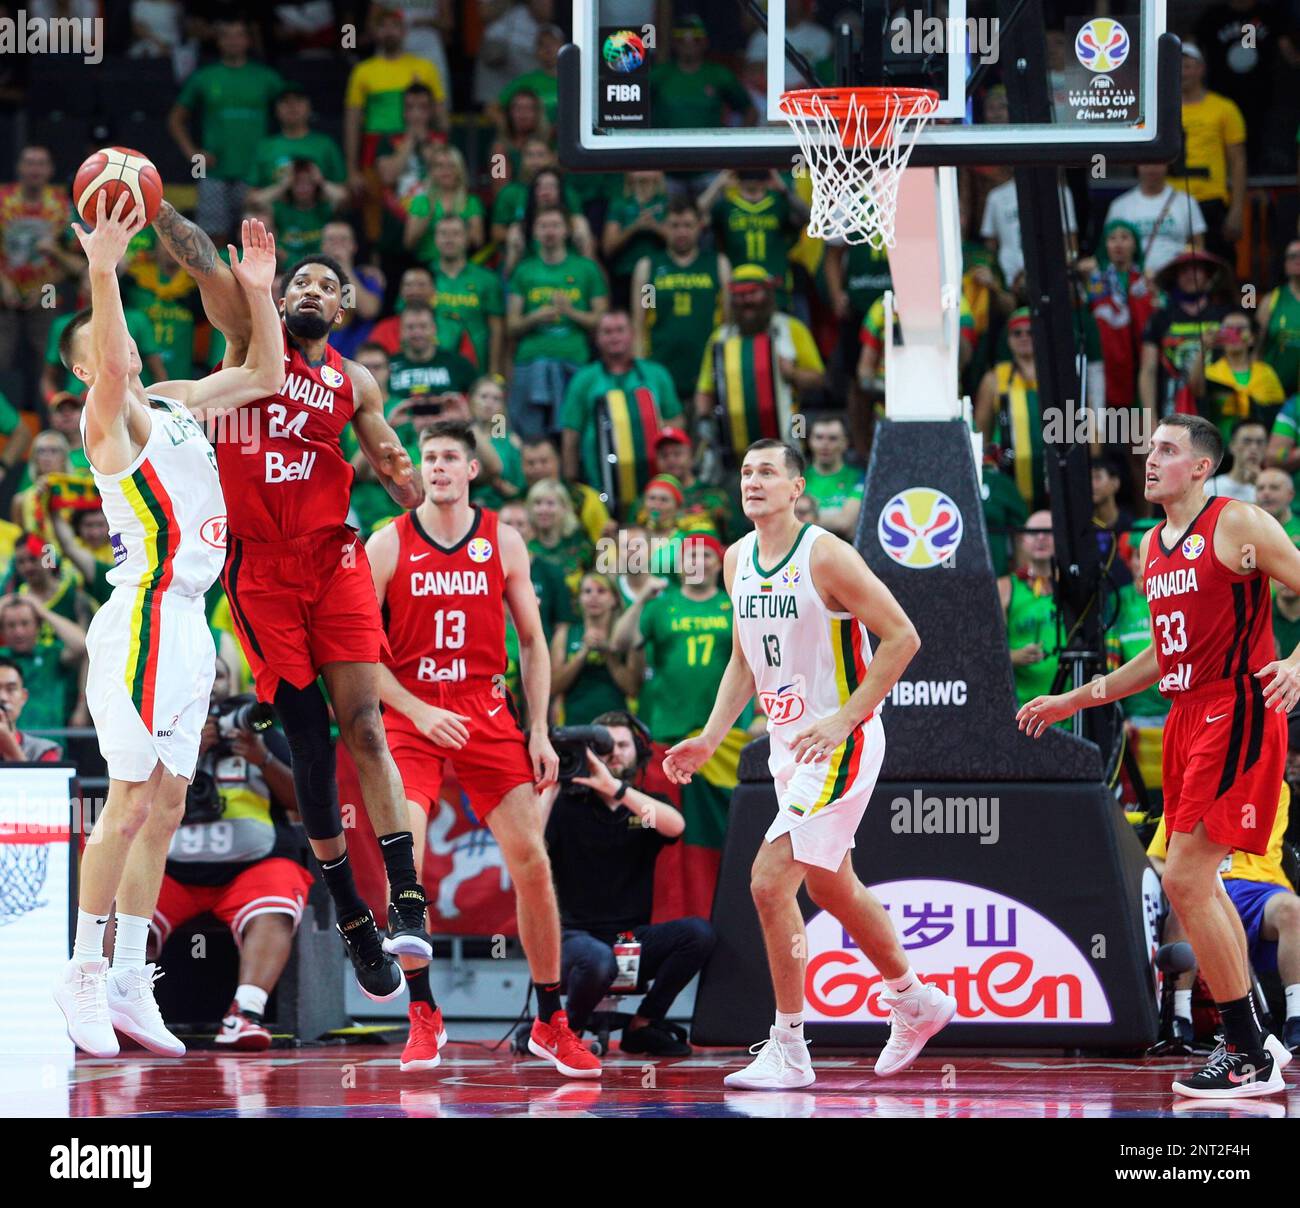 Canada's Khem Birch (L2), Conor Morgan (L3) and Kyle Wiltjer (R1) compete  with Lithuania's Arnas Butkevicius (L1) and Paulius Jankunas (R2) during a  group H match in the FIBA Basketball World Cup